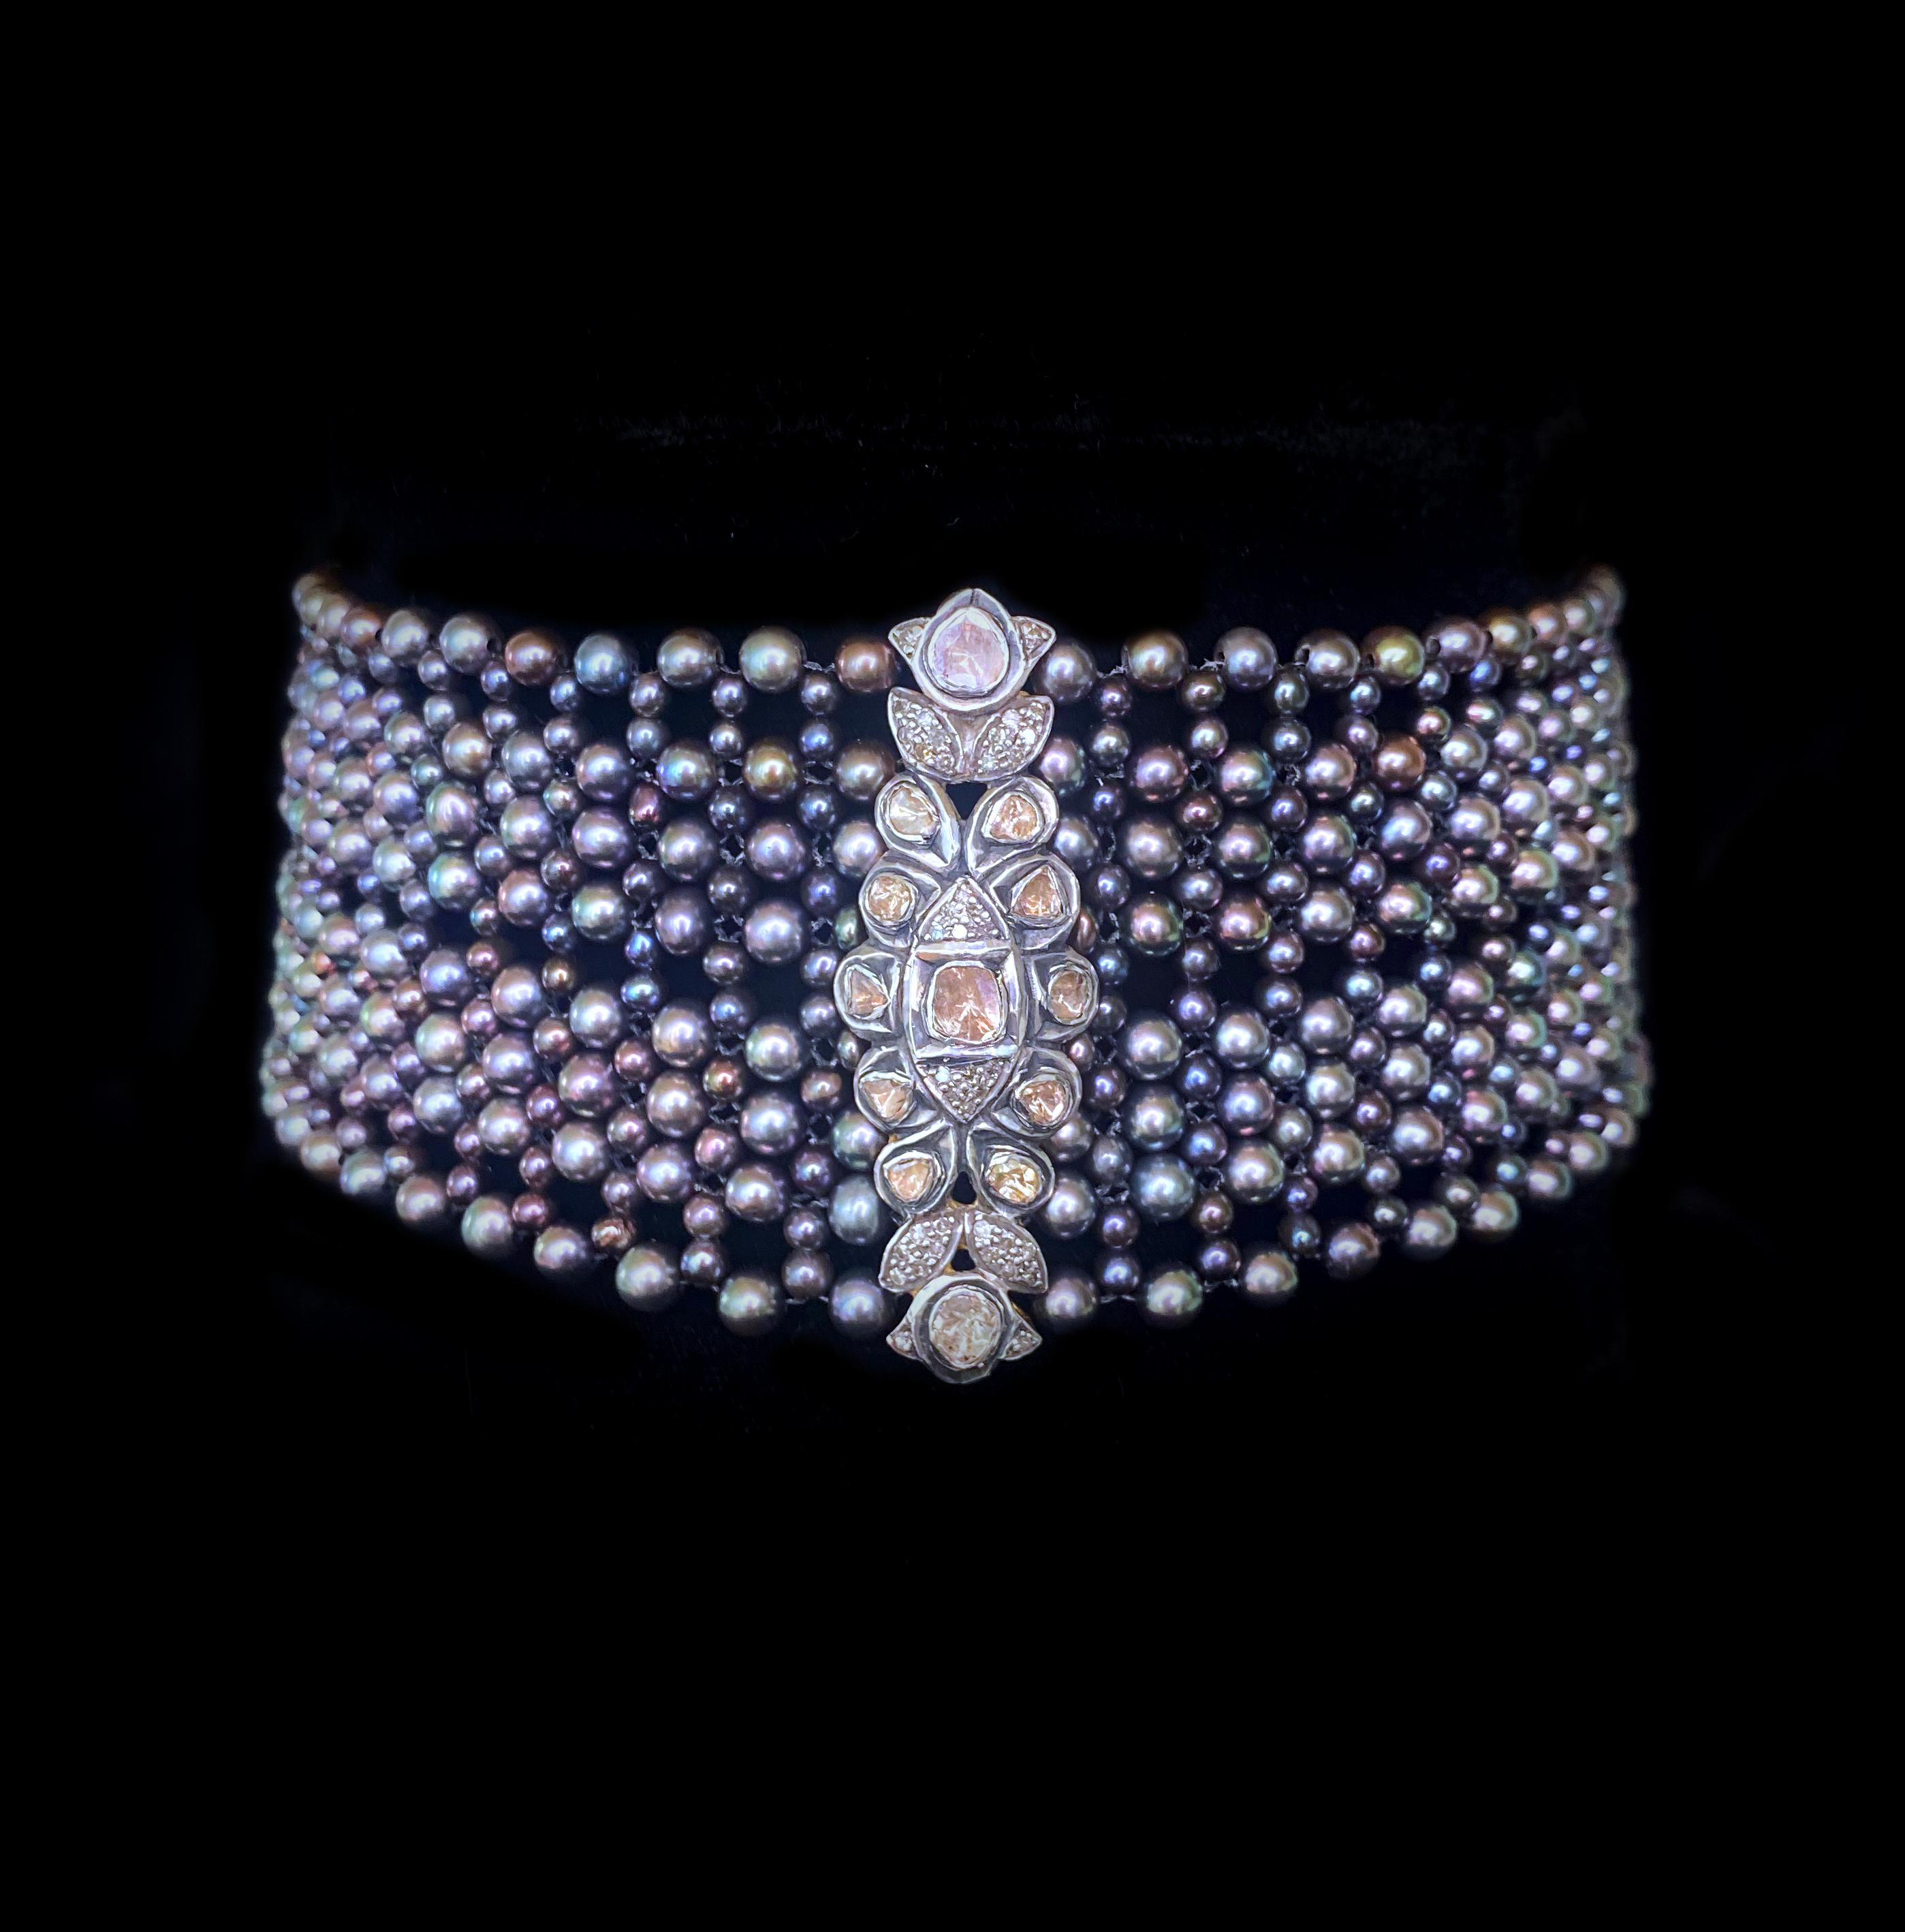 Beautiful piece by Marina J. This choker features highly lustrous and iridescent Black Pearls which display an 